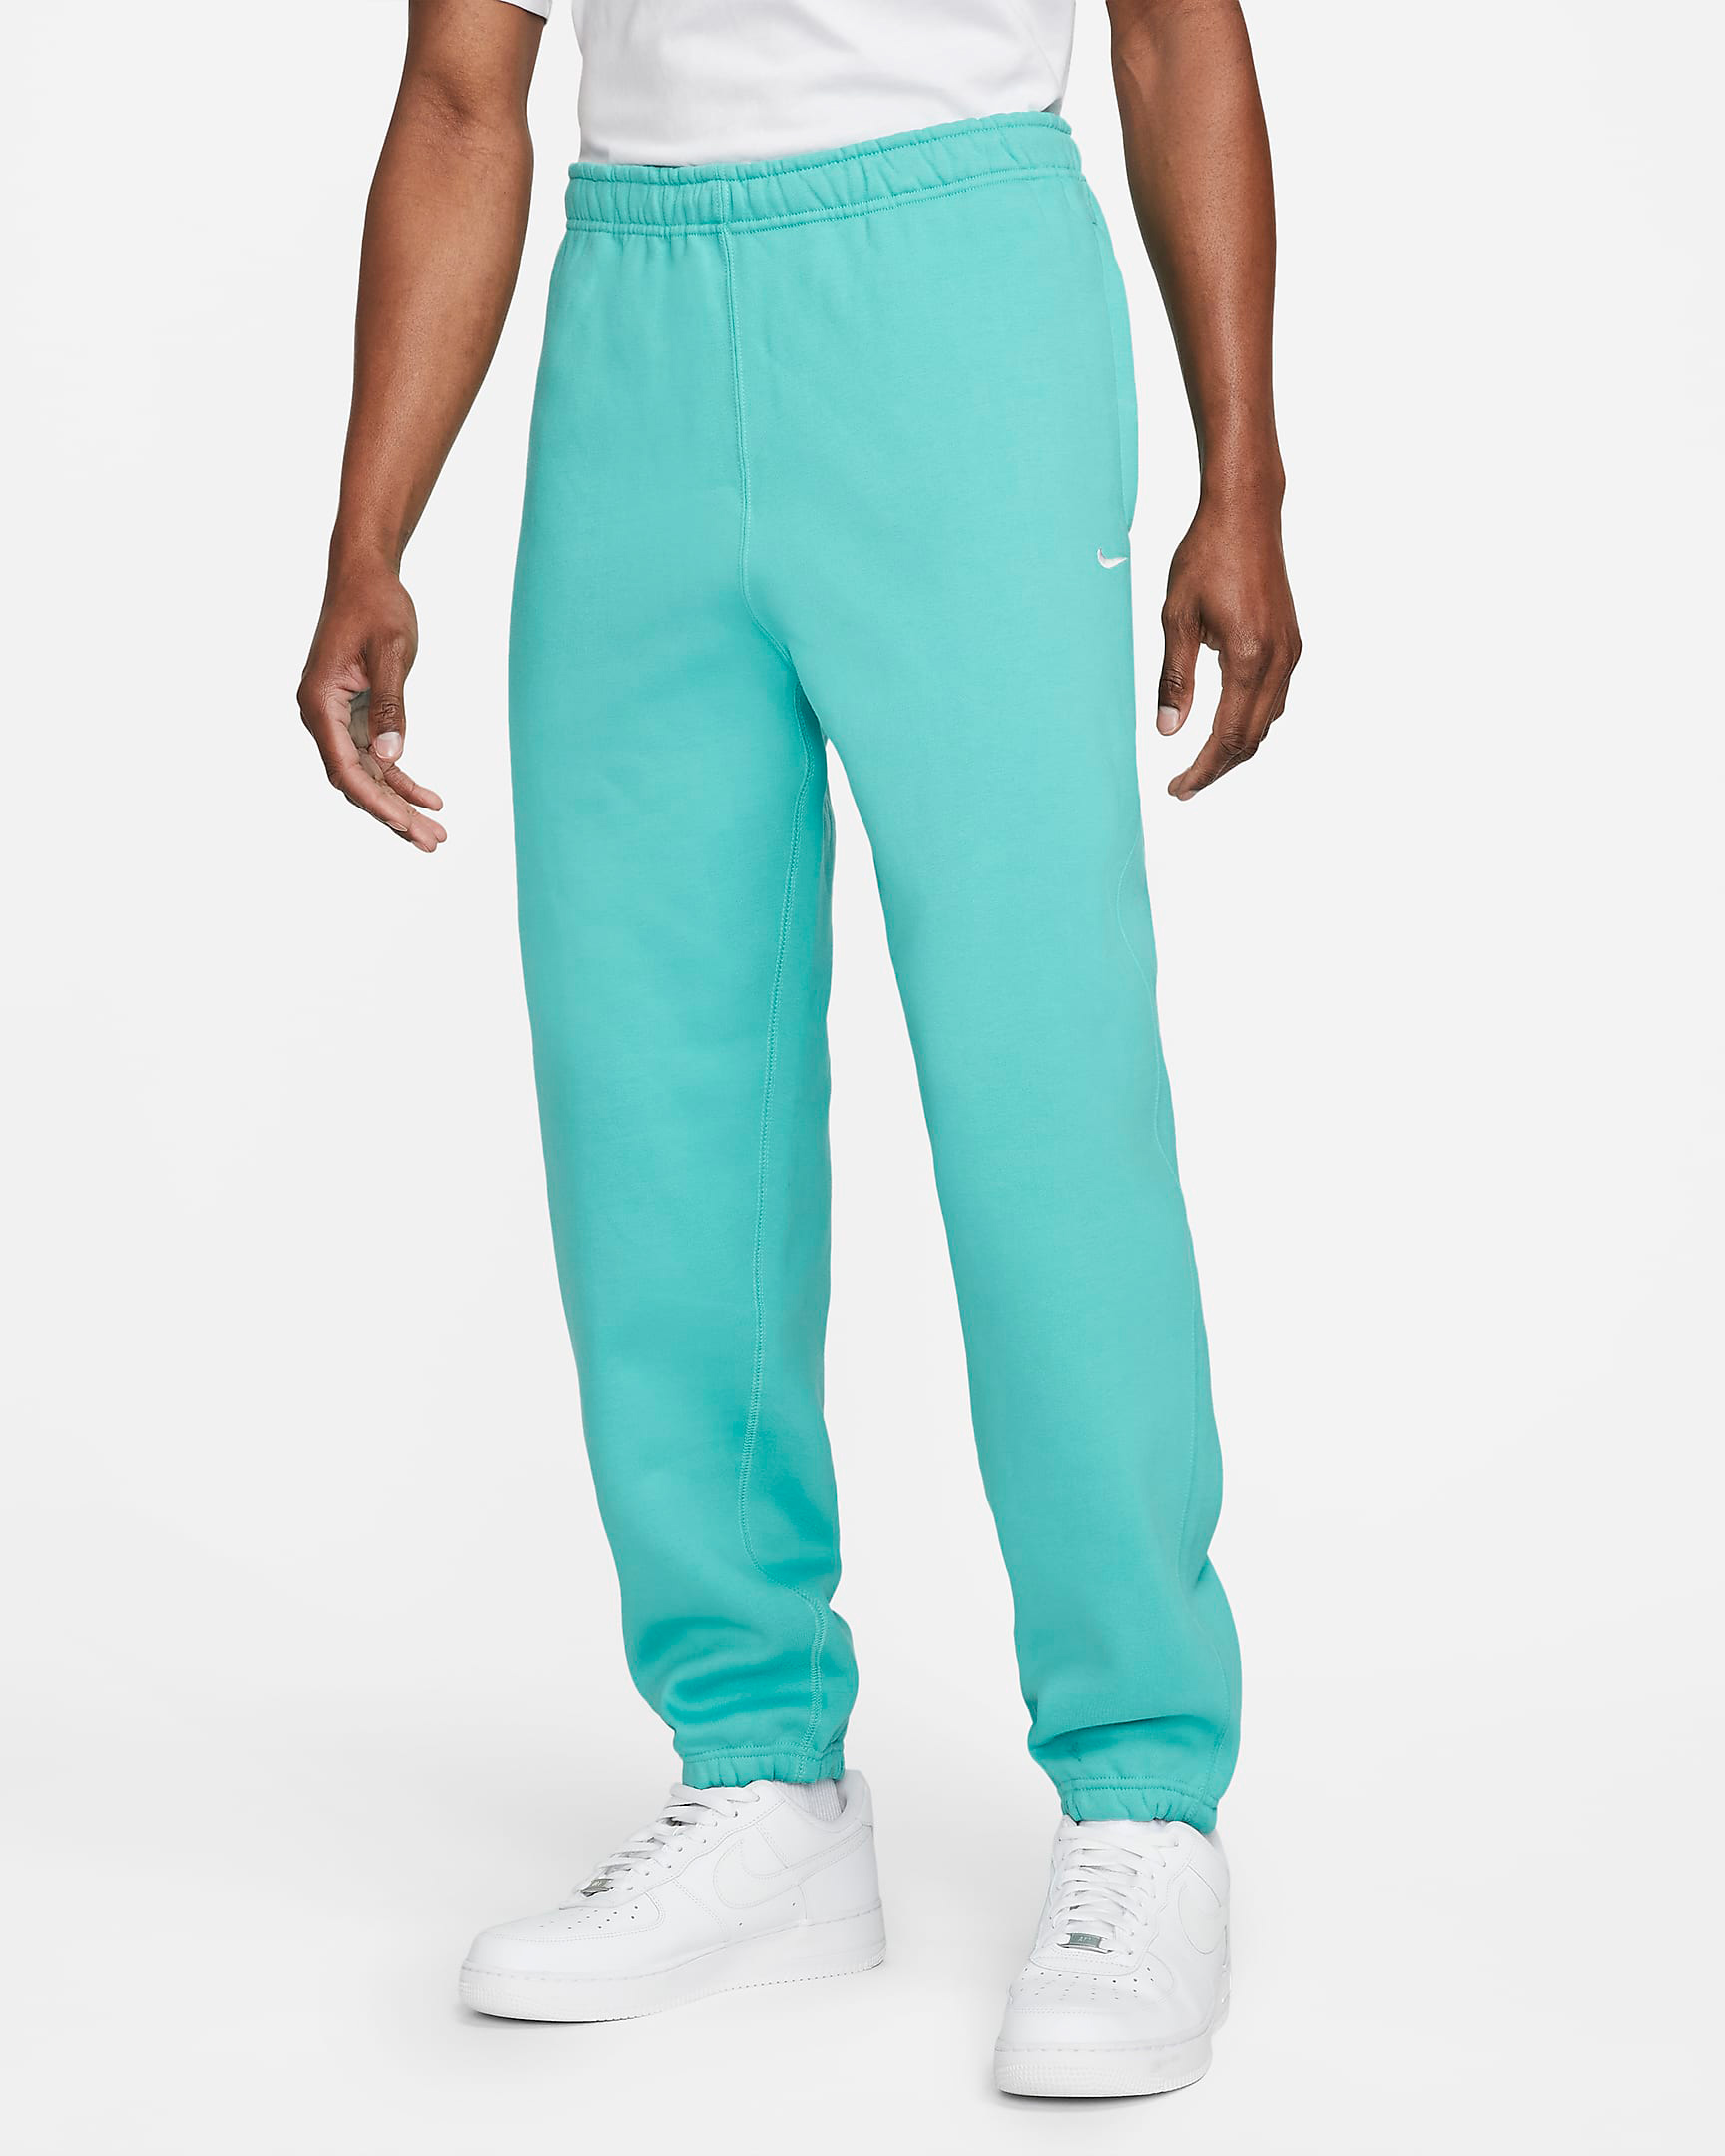 nike-solo-swoosh-pants-washed-teal-1